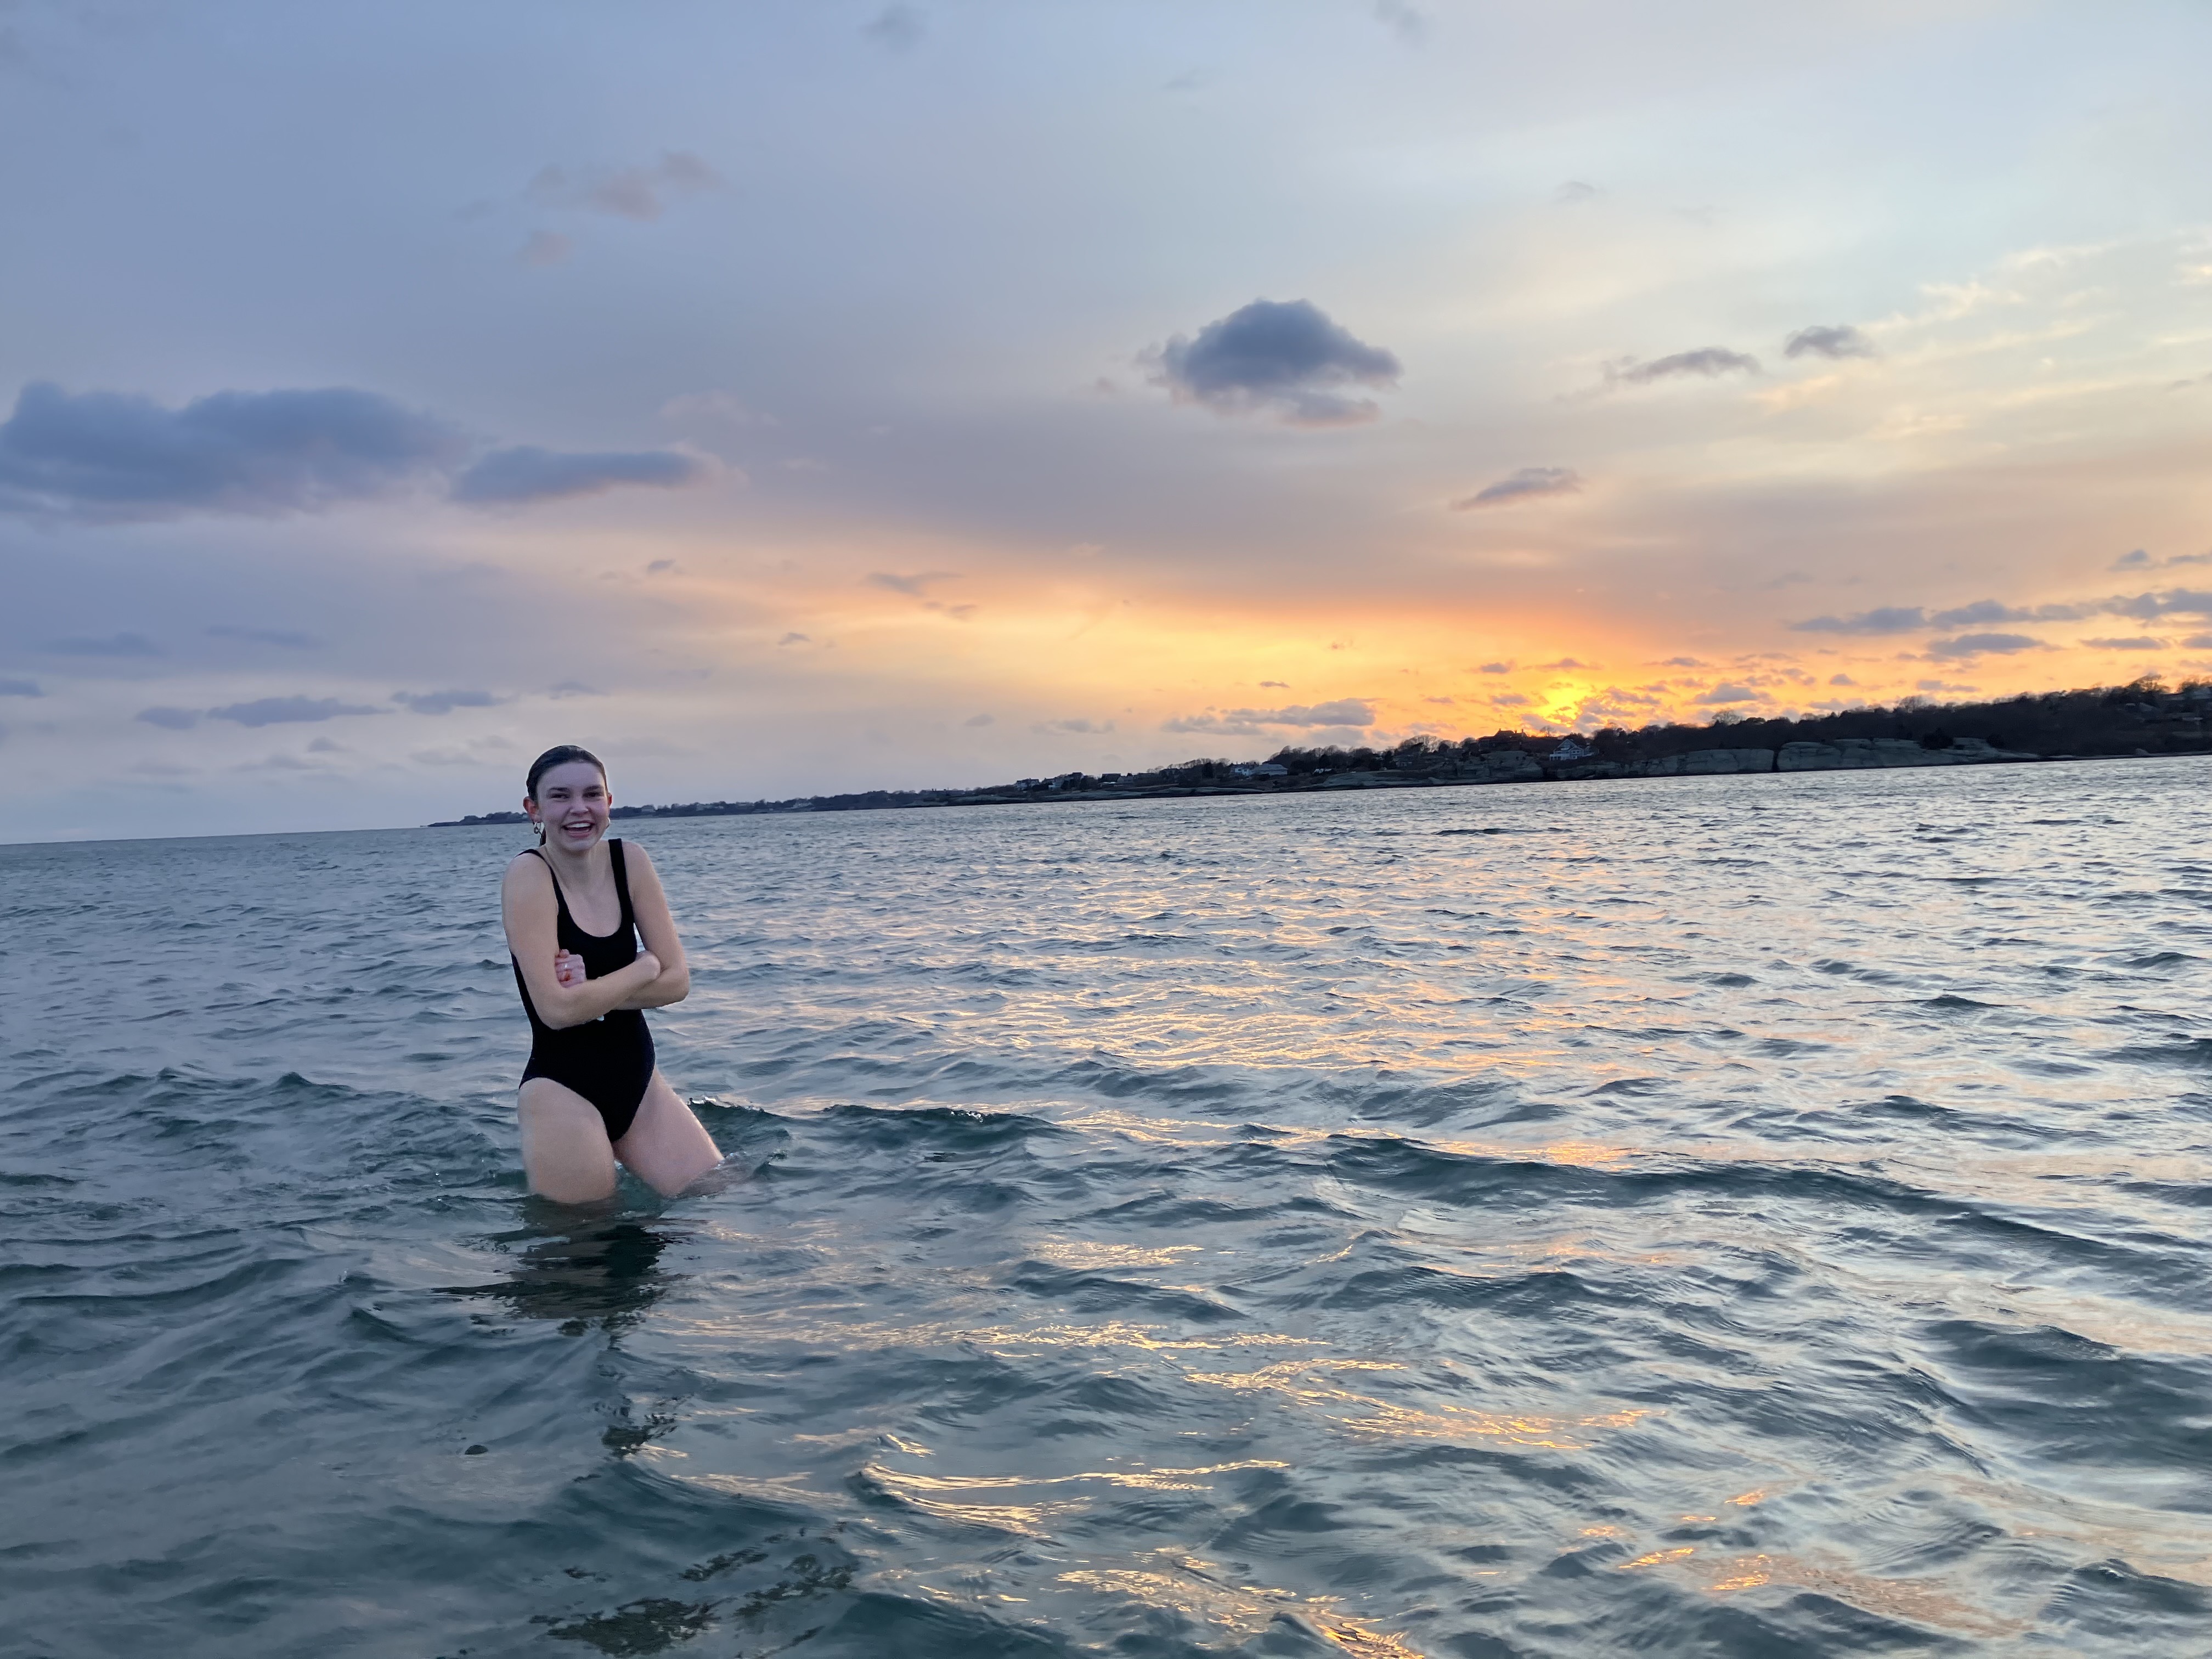 Molly Woodhouse smiles as she exits the water after a sunset swim at Sachuest Beach in Middletown, Rhode Island, on Tuesday, March 7, 2023. Molly is a senior in nursing at Salve Regina University in Newport, Rhode Island.